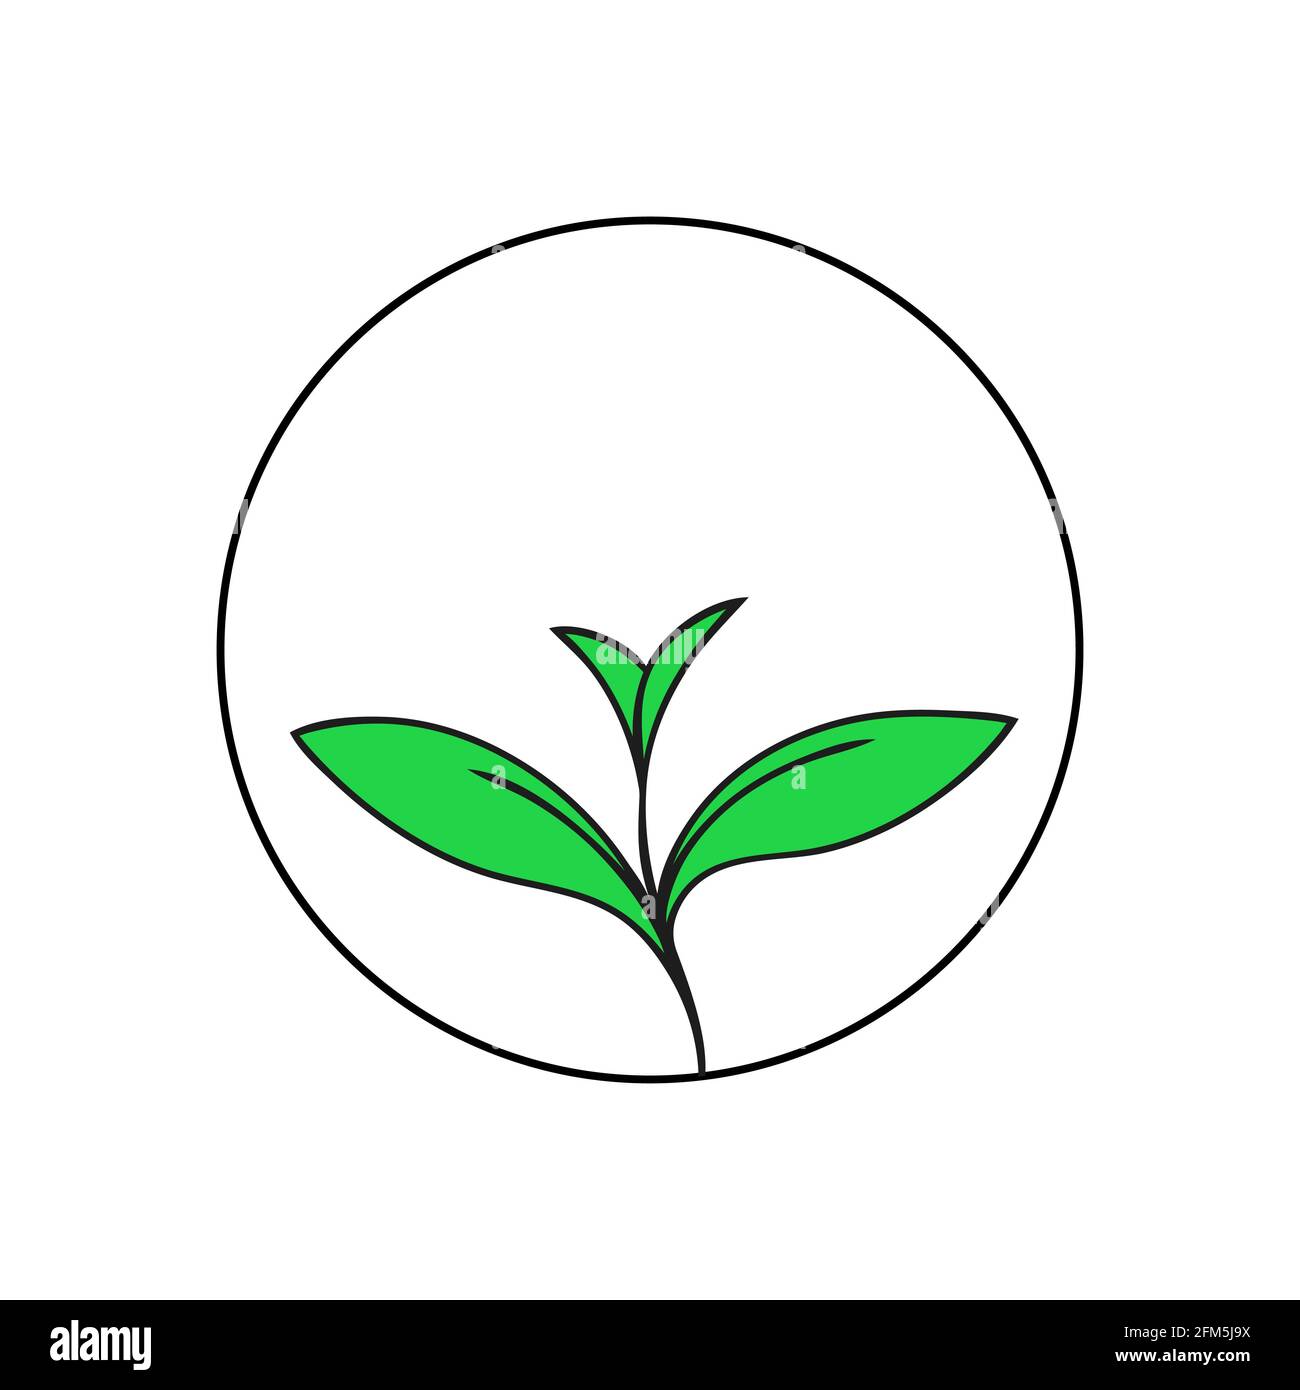 Green young sprout of a plant. Ecology symbol. Outline illustration on a white background Stock Photo